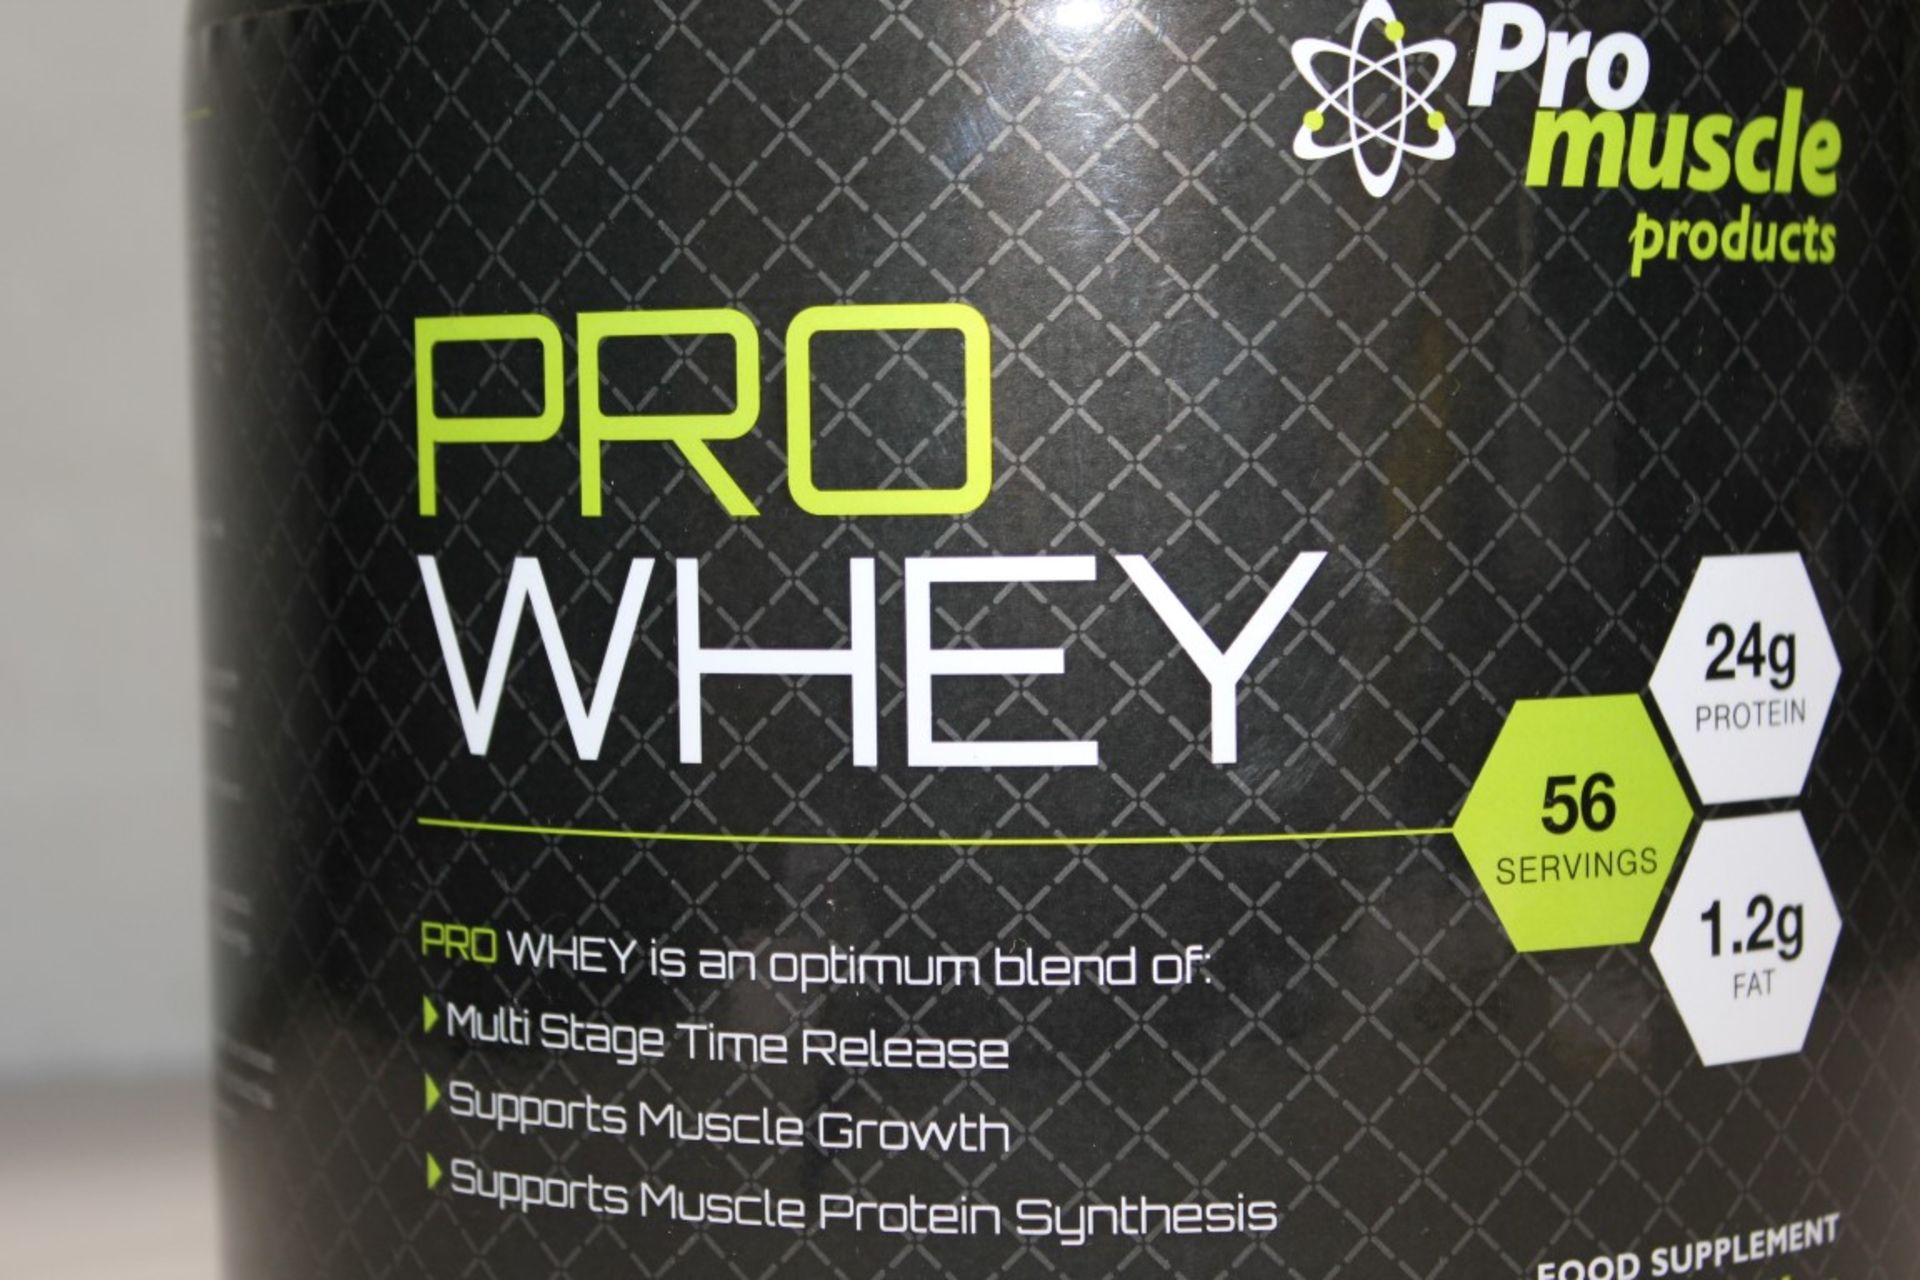 3 x Tubs Of "Pro Muscle" CORE MASS GAINER Food Supplement (2.25kg Each) - Includes 3 x Flavours: - Image 2 of 6